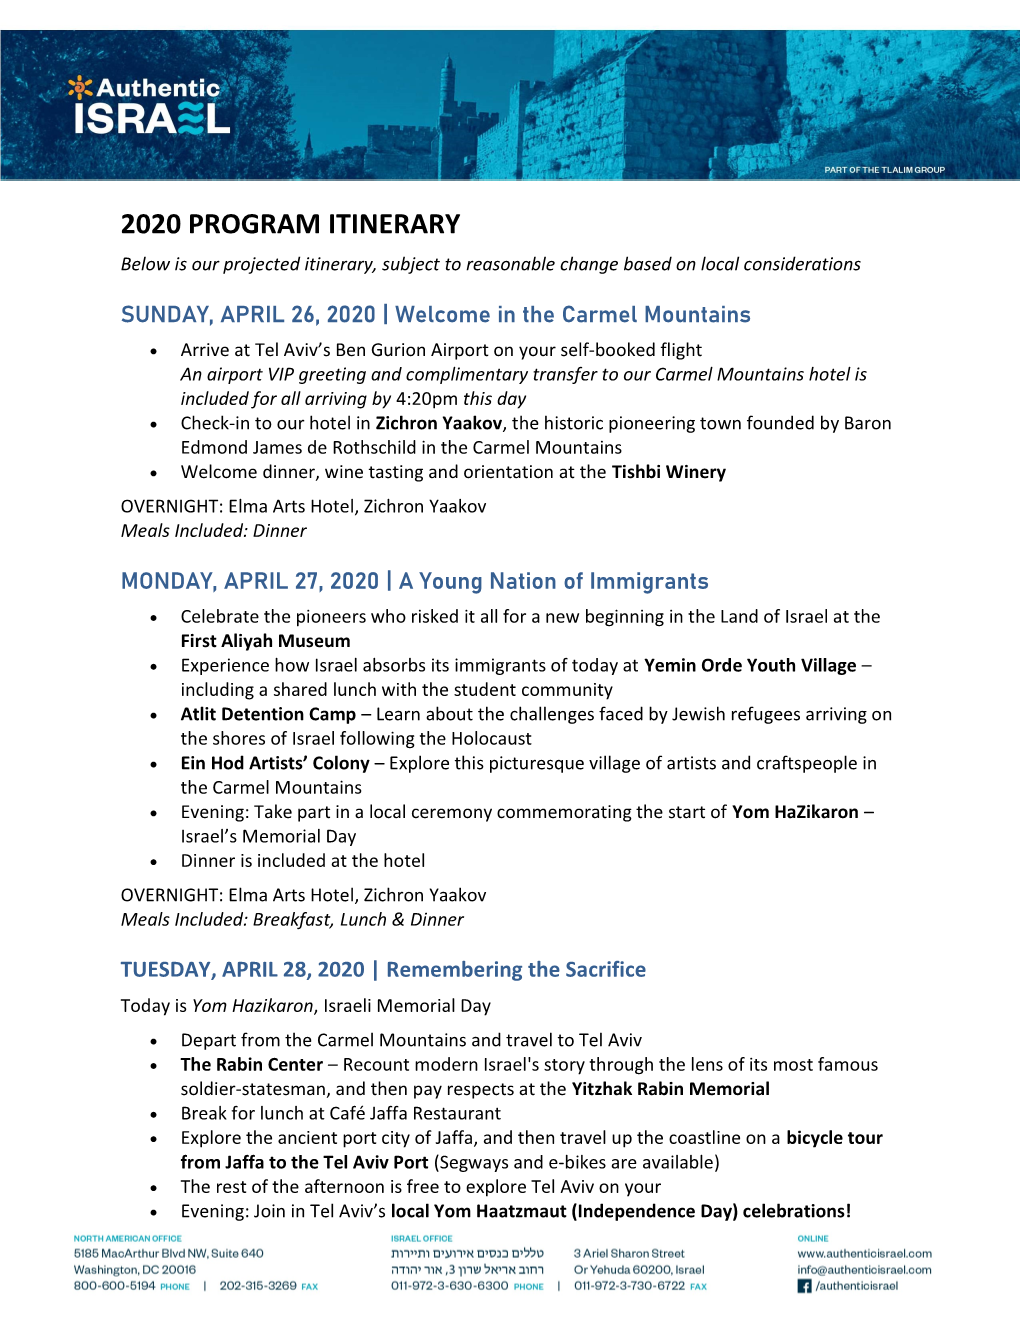 2020 PROGRAM ITINERARY Below Is Our Projected Itinerary, Subject to Reasonable Change Based on Local Considerations